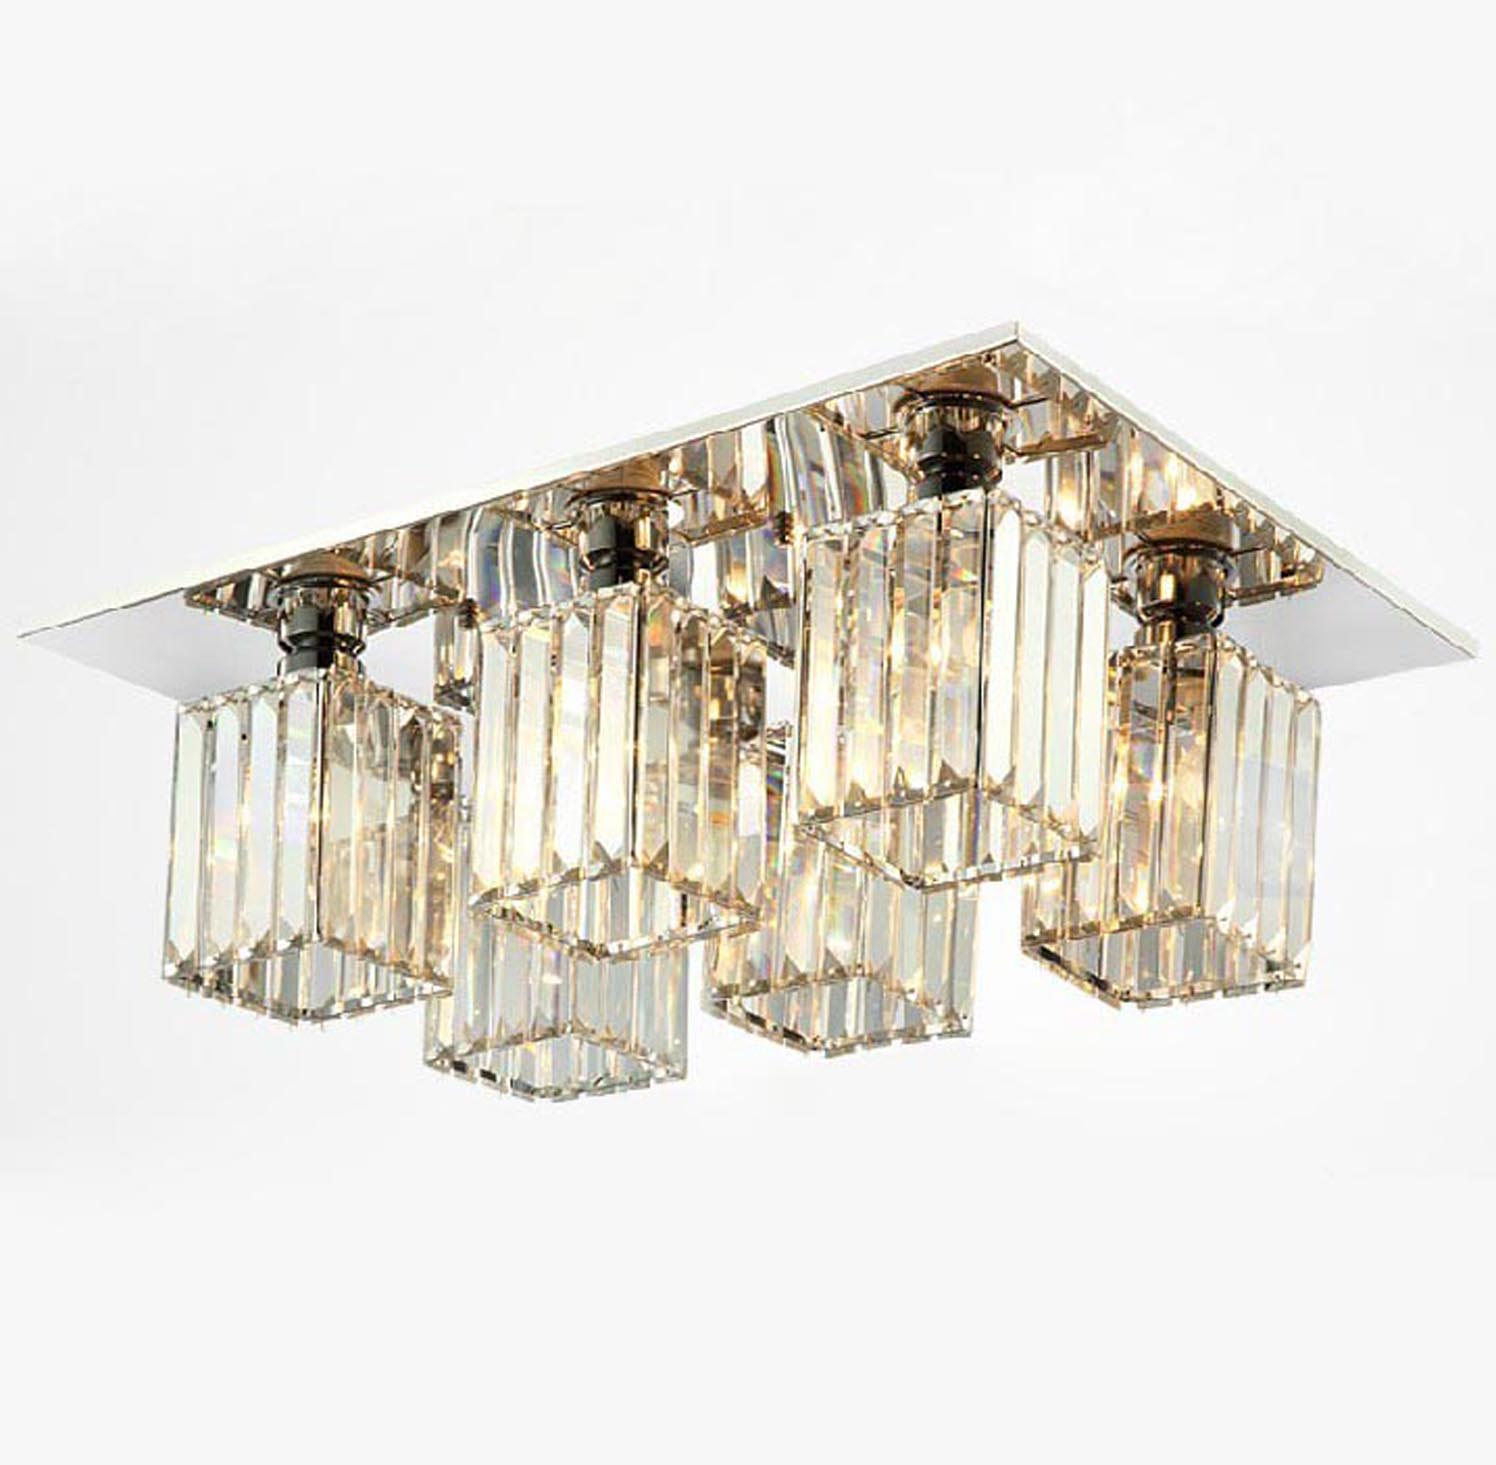 Dining ceiling lamp HL-9507-6X-Dining ceiling lamp HL-9507-6X